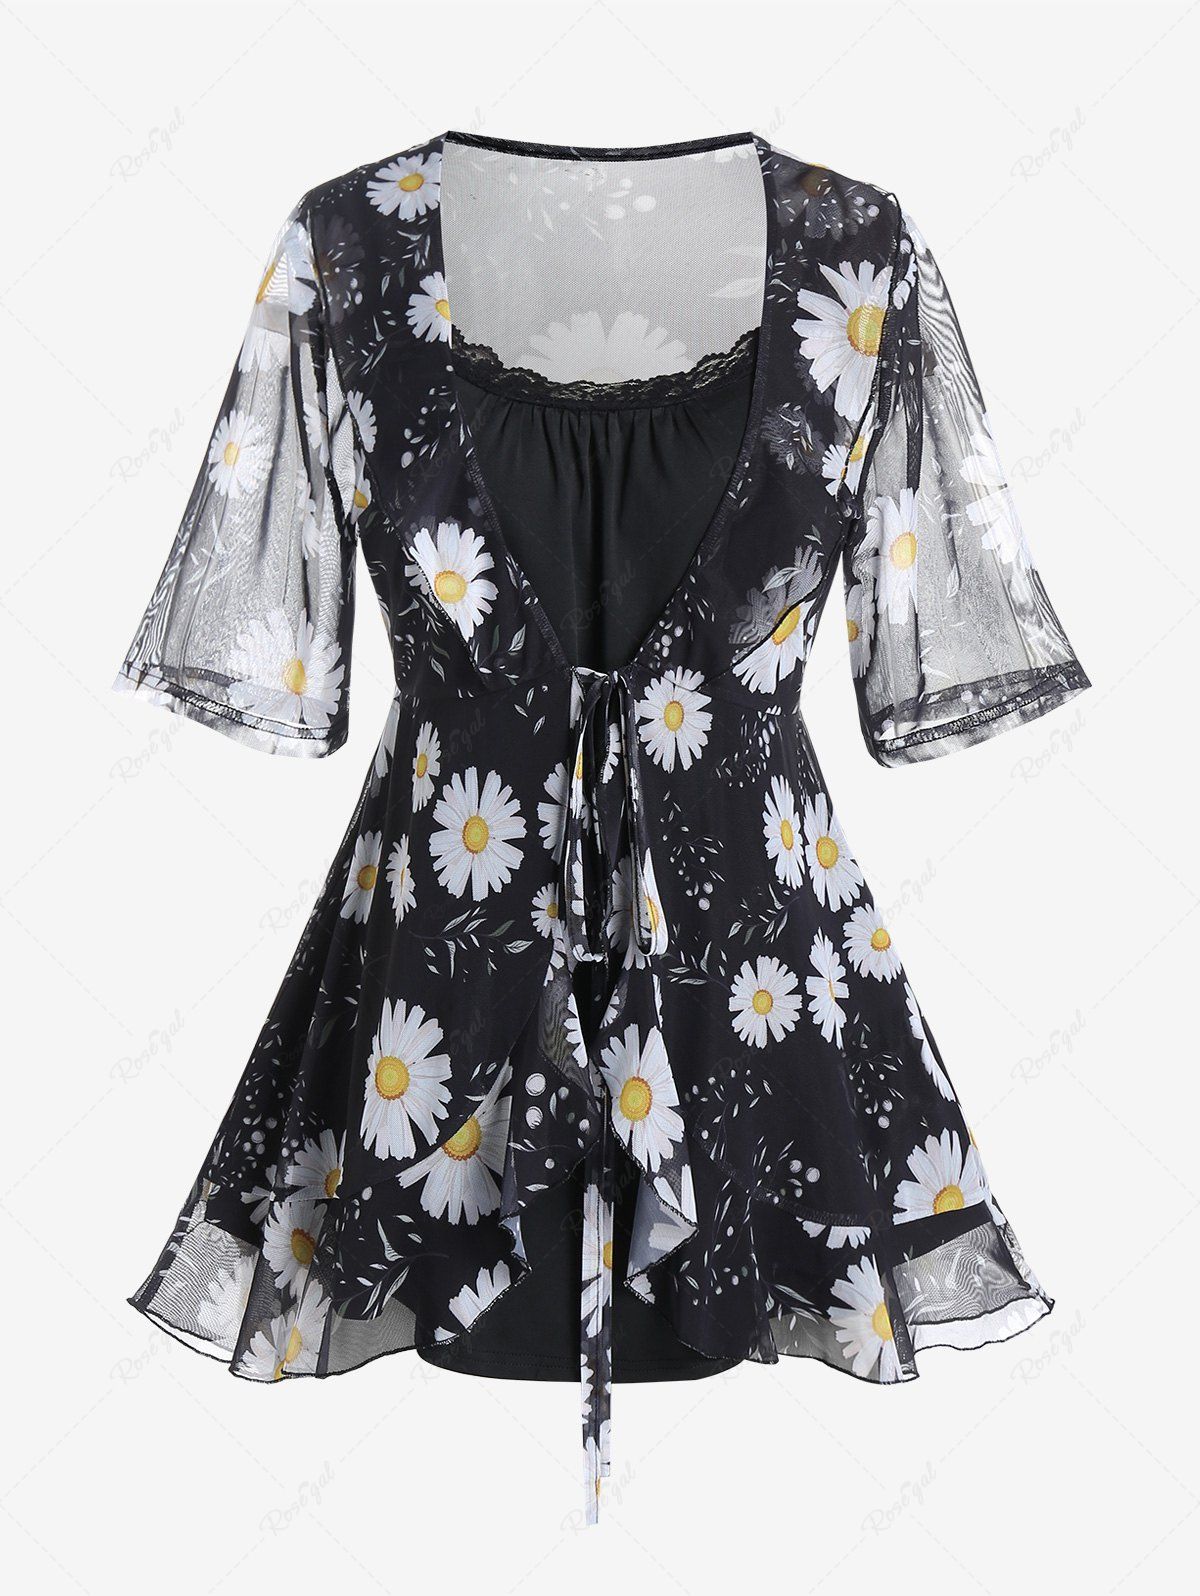 Chic Plus Size Sunflower Print Sheer Mesh Blouse and Camisole Set  